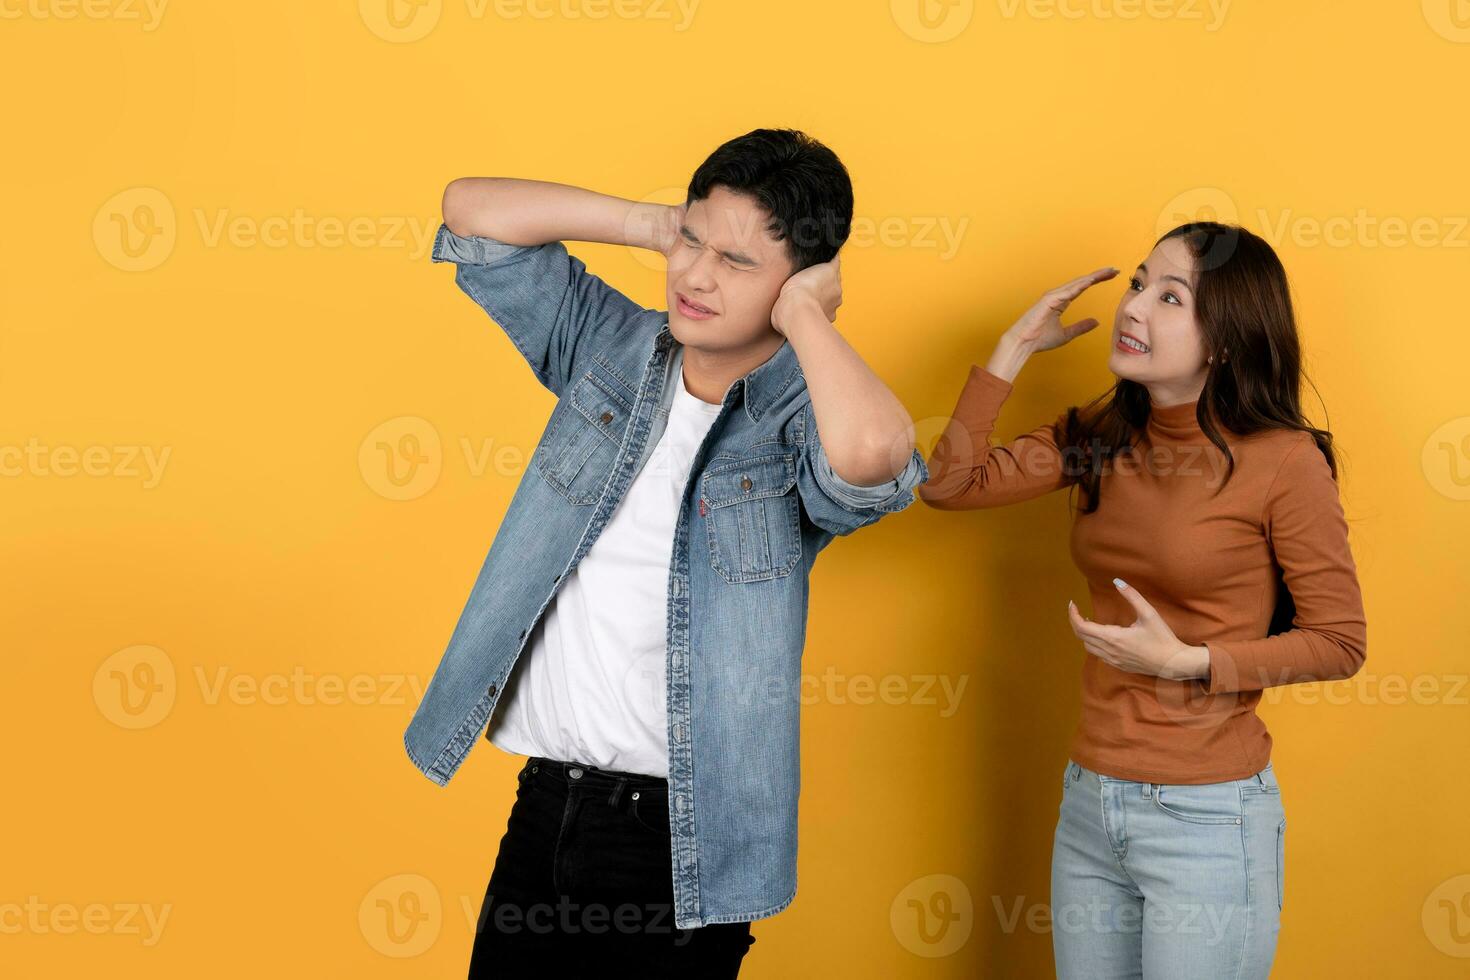 Asian man who is upset while his girlfriend is angry and yelling at him photo